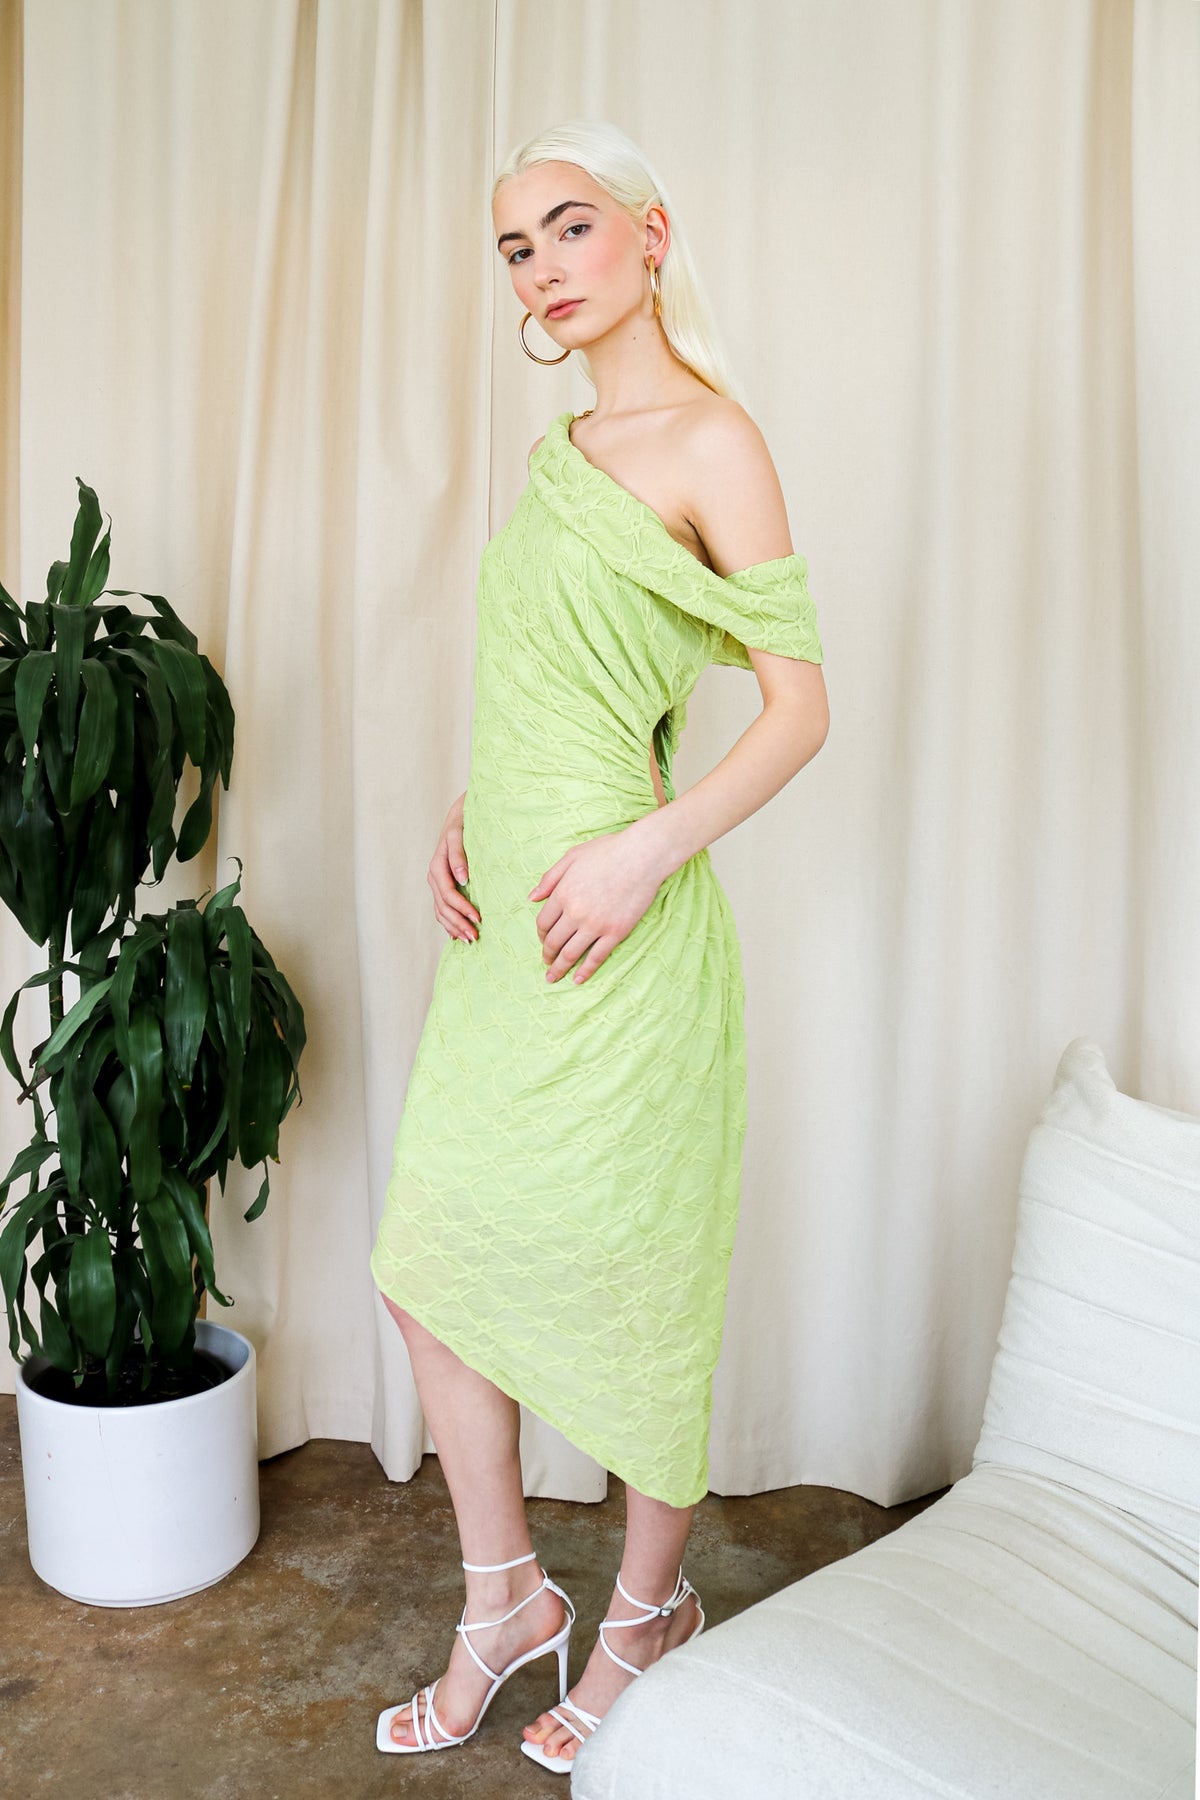 Model wearing a lime green one-shoulder textured midi dress, standing beside a plant and a white cushioned chair.